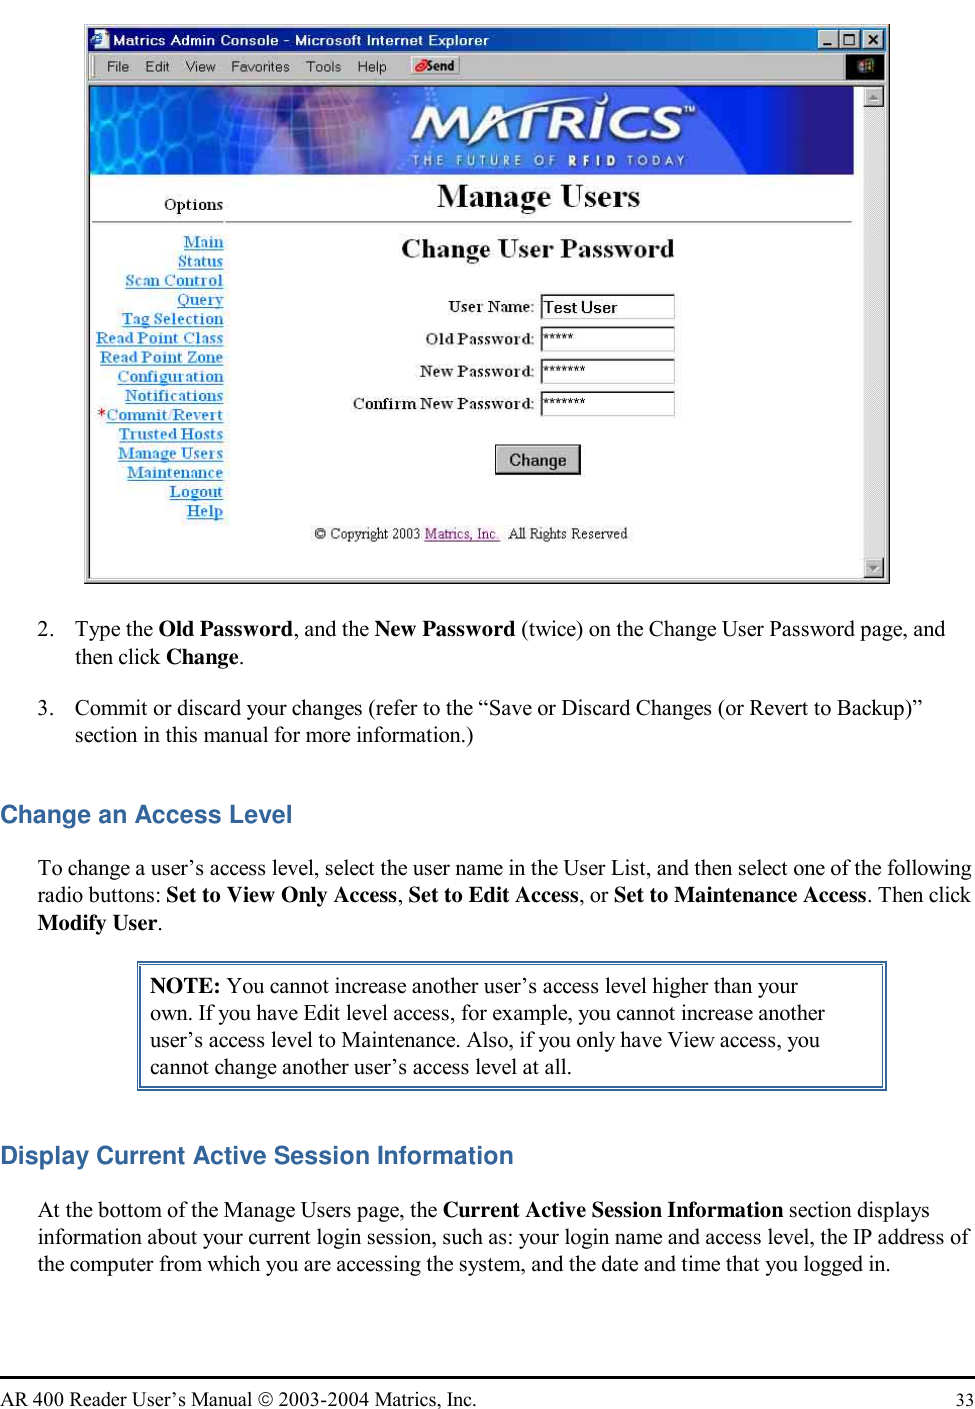   AR 400 Reader User’s Manual  2003-2004 Matrics, Inc.  33  2. Type the Old Password, and the New Password (twice) on the Change User Password page, and then click Change. 3.  Commit or discard your changes (refer to the “Save or Discard Changes (or Revert to Backup)” section in this manual for more information.) Change an Access Level To change a user’s access level, select the user name in the User List, and then select one of the following radio buttons: Set to View Only Access, Set to Edit Access, or Set to Maintenance Access. Then click Modify User. NOTE: You cannot increase another user’s access level higher than your own. If you have Edit level access, for example, you cannot increase another user’s access level to Maintenance. Also, if you only have View access, you cannot change another user’s access level at all. Display Current Active Session Information At the bottom of the Manage Users page, the Current Active Session Information section displays information about your current login session, such as: your login name and access level, the IP address of the computer from which you are accessing the system, and the date and time that you logged in. 